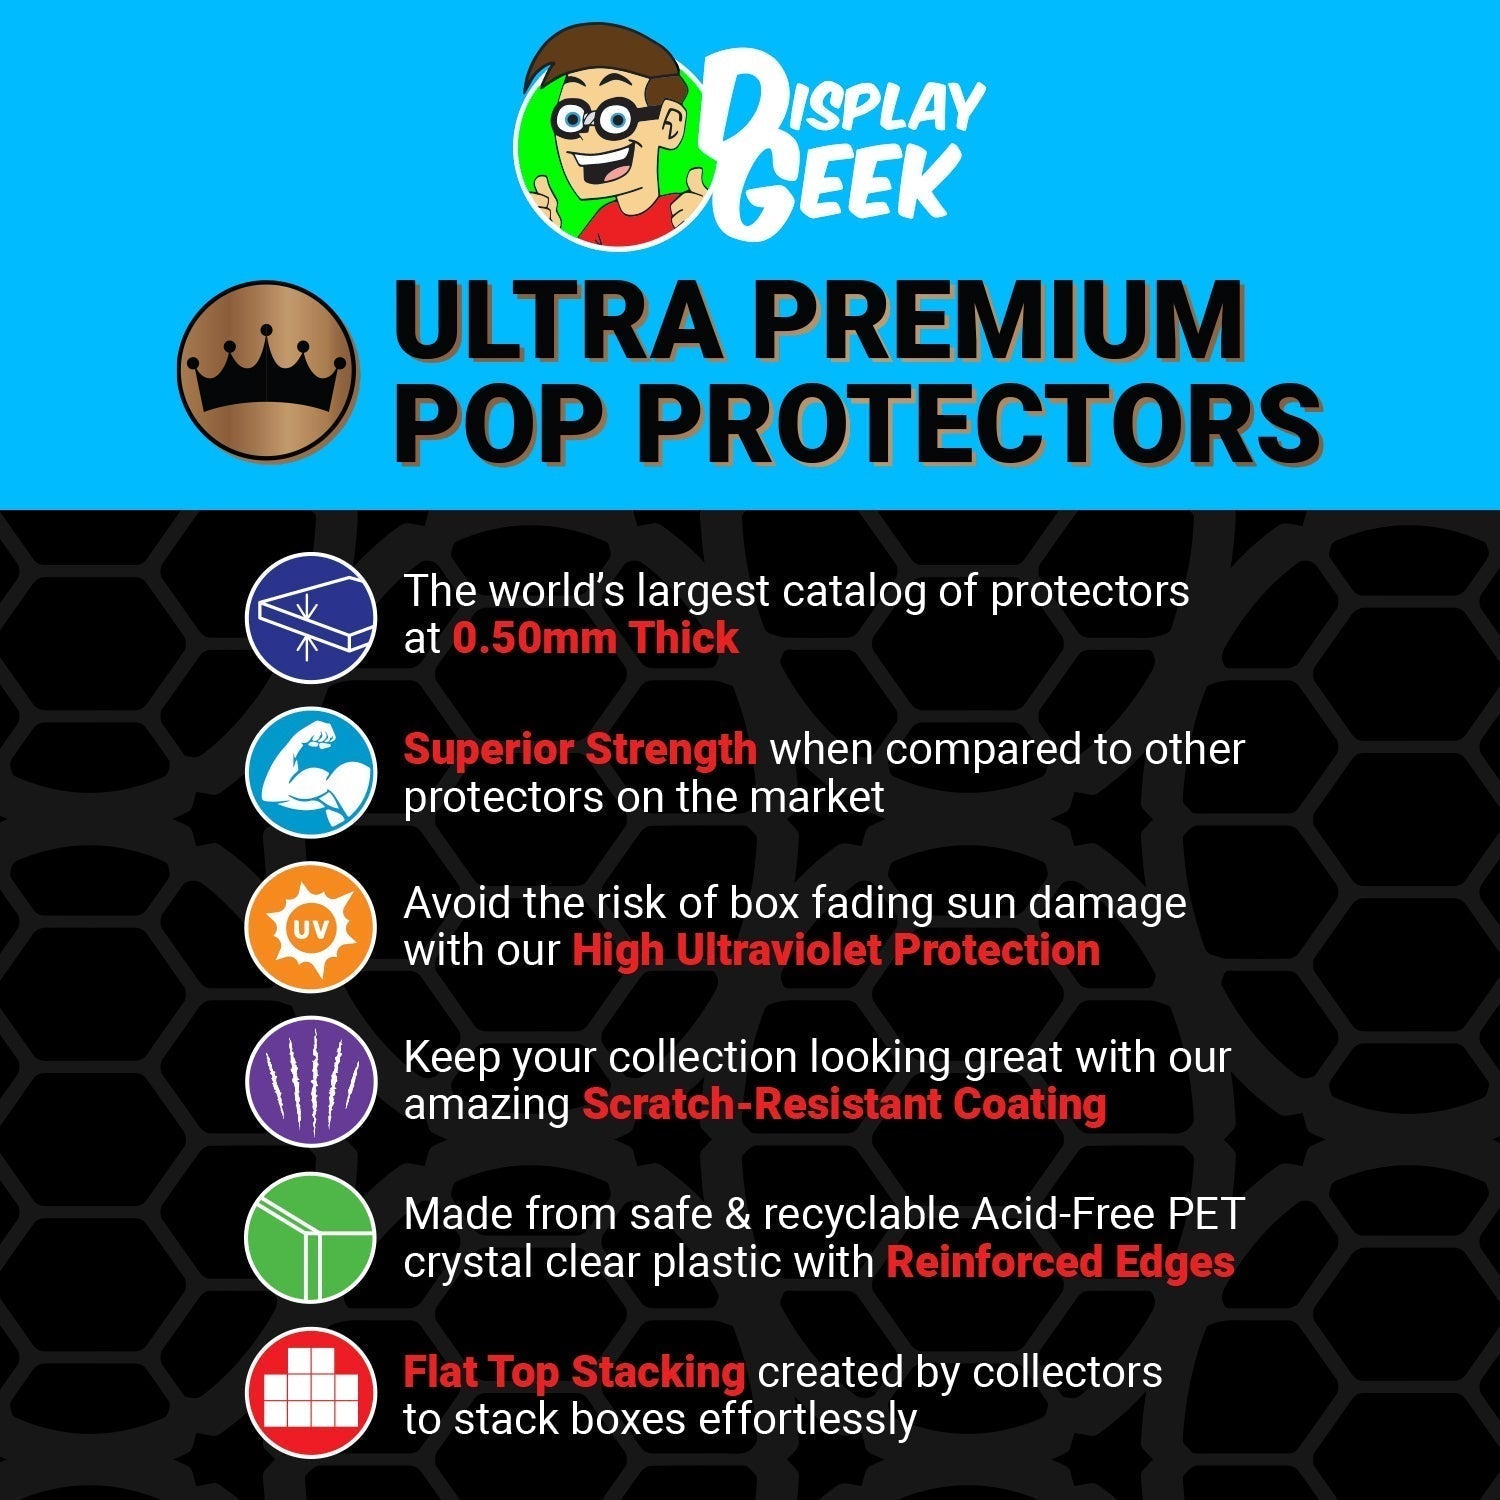 Pop Protector for Queen Flash Gordon #30 Funko Pop Albums - PPG Pop Protector Guide Search Created by Display Geek